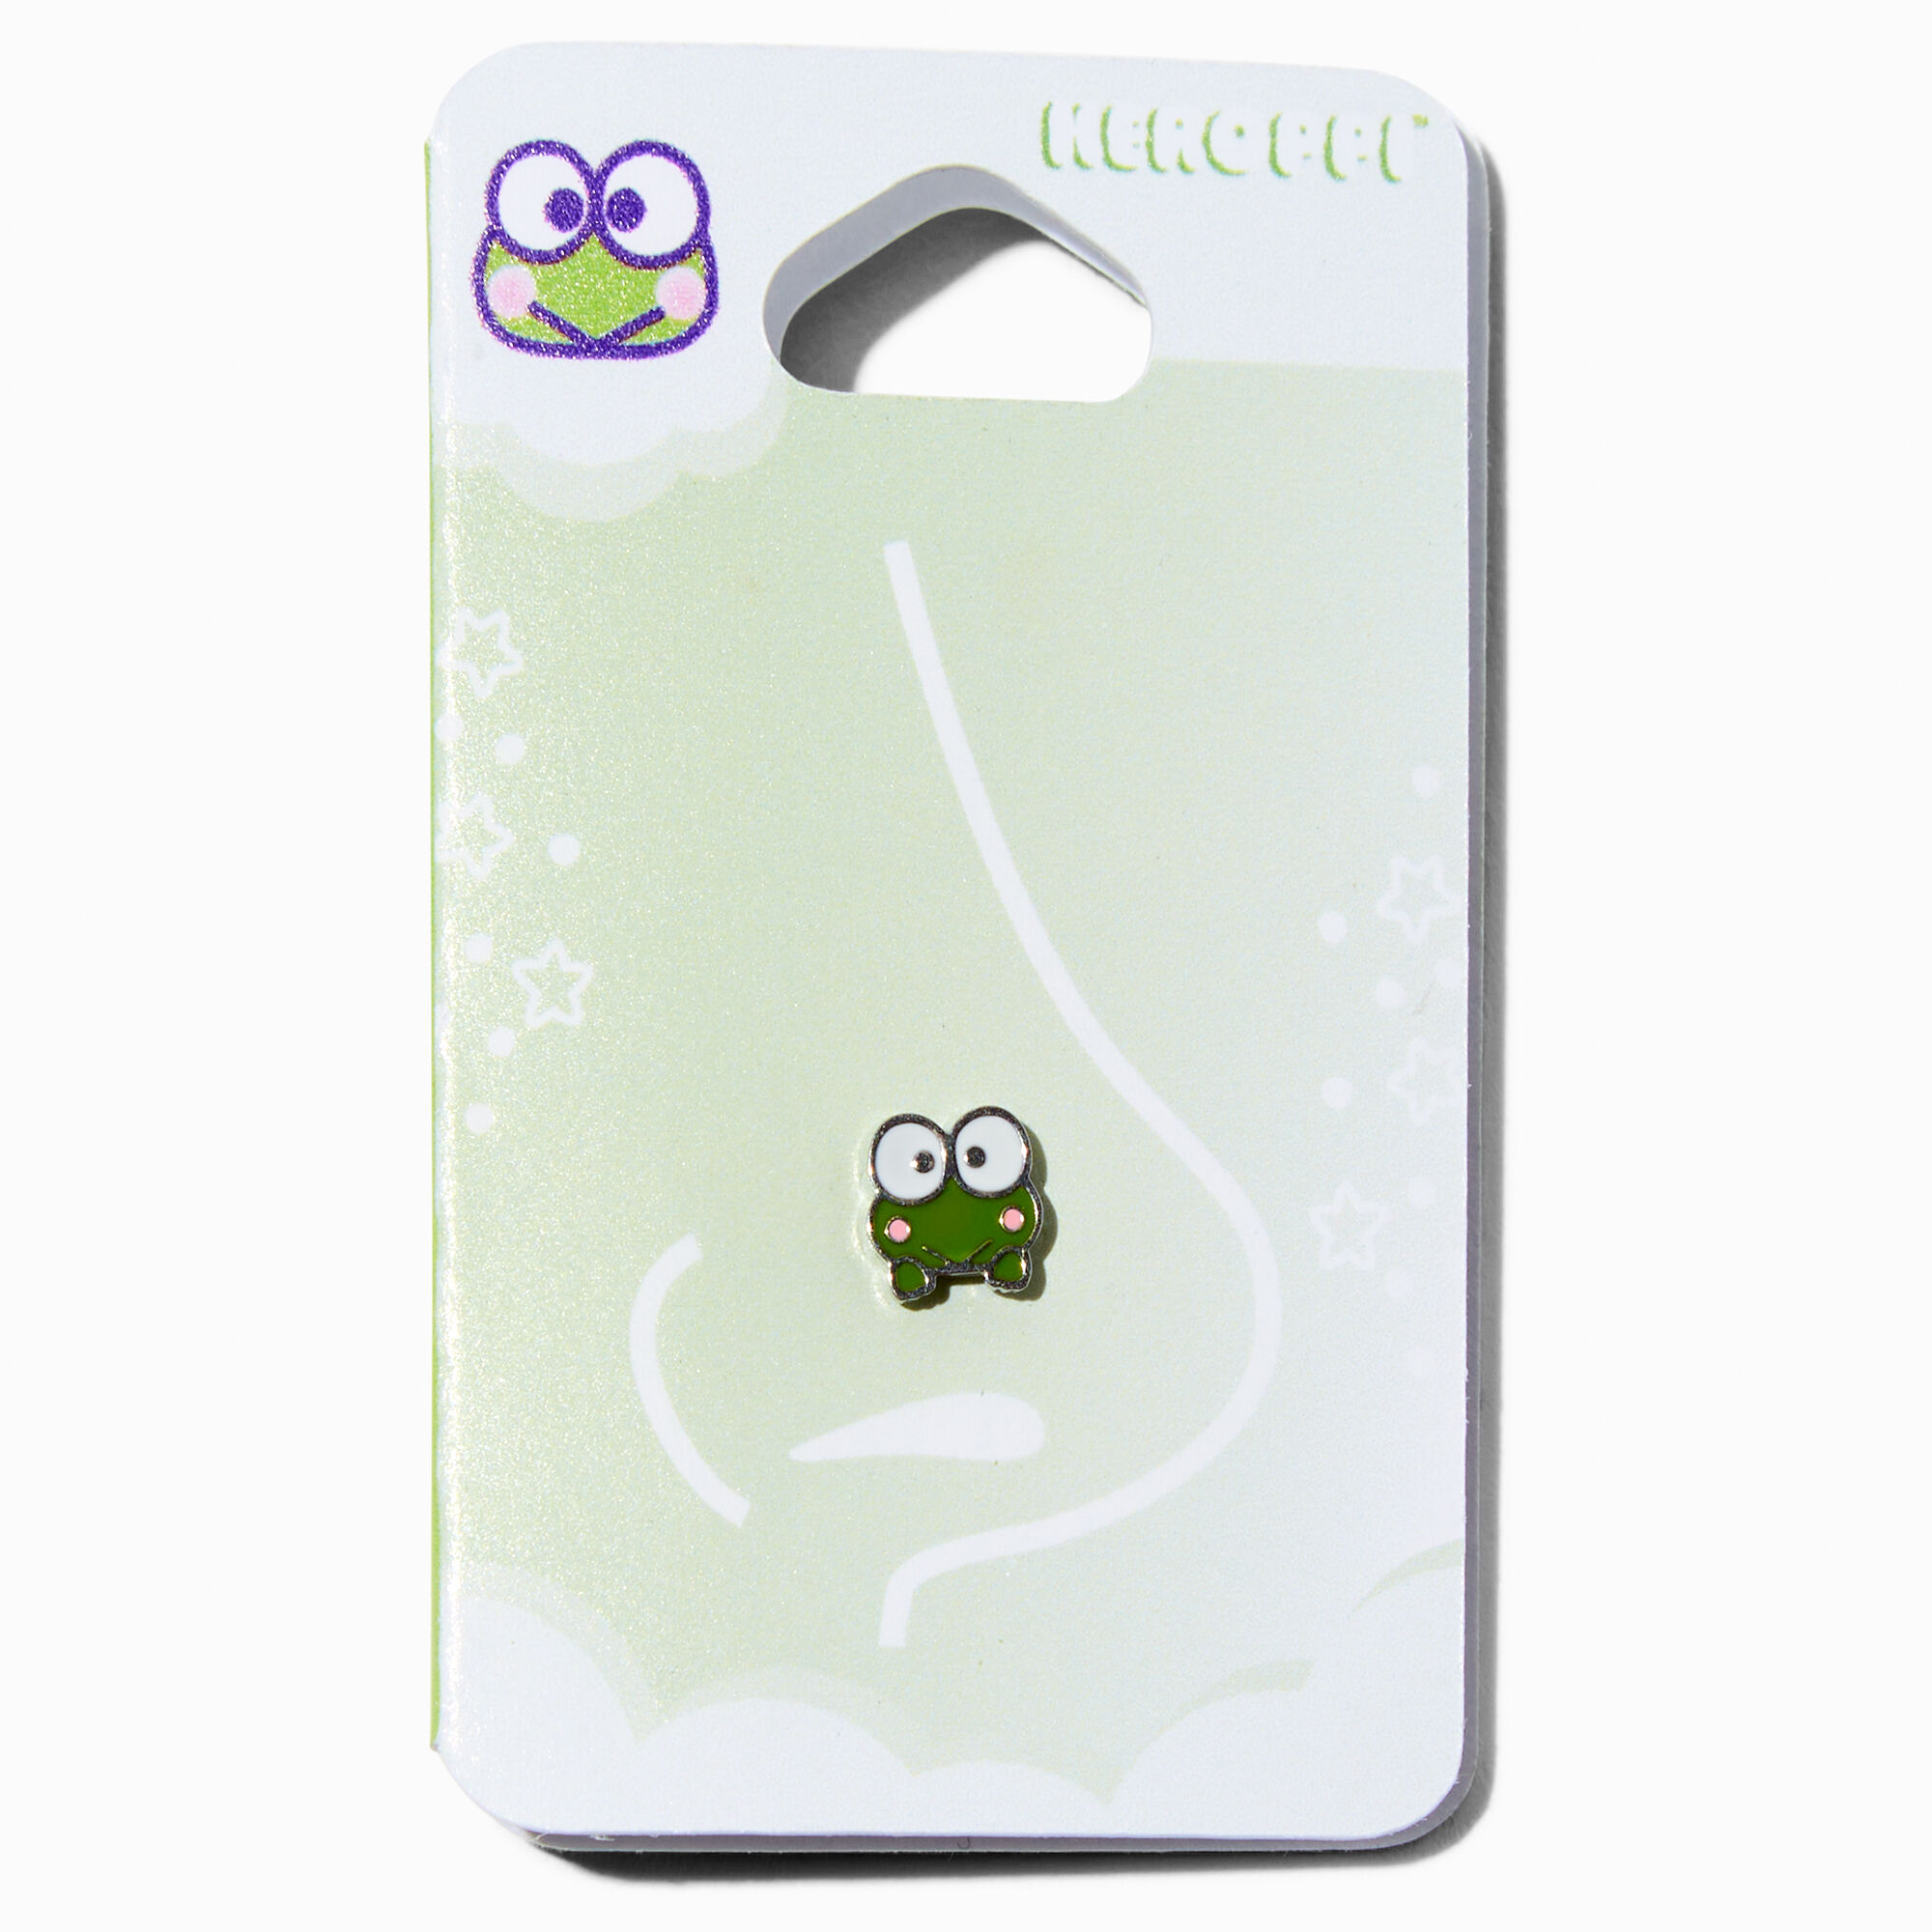 View Claires Keroppi Stainless Steel Enamel 20G Nose Stud Silver information